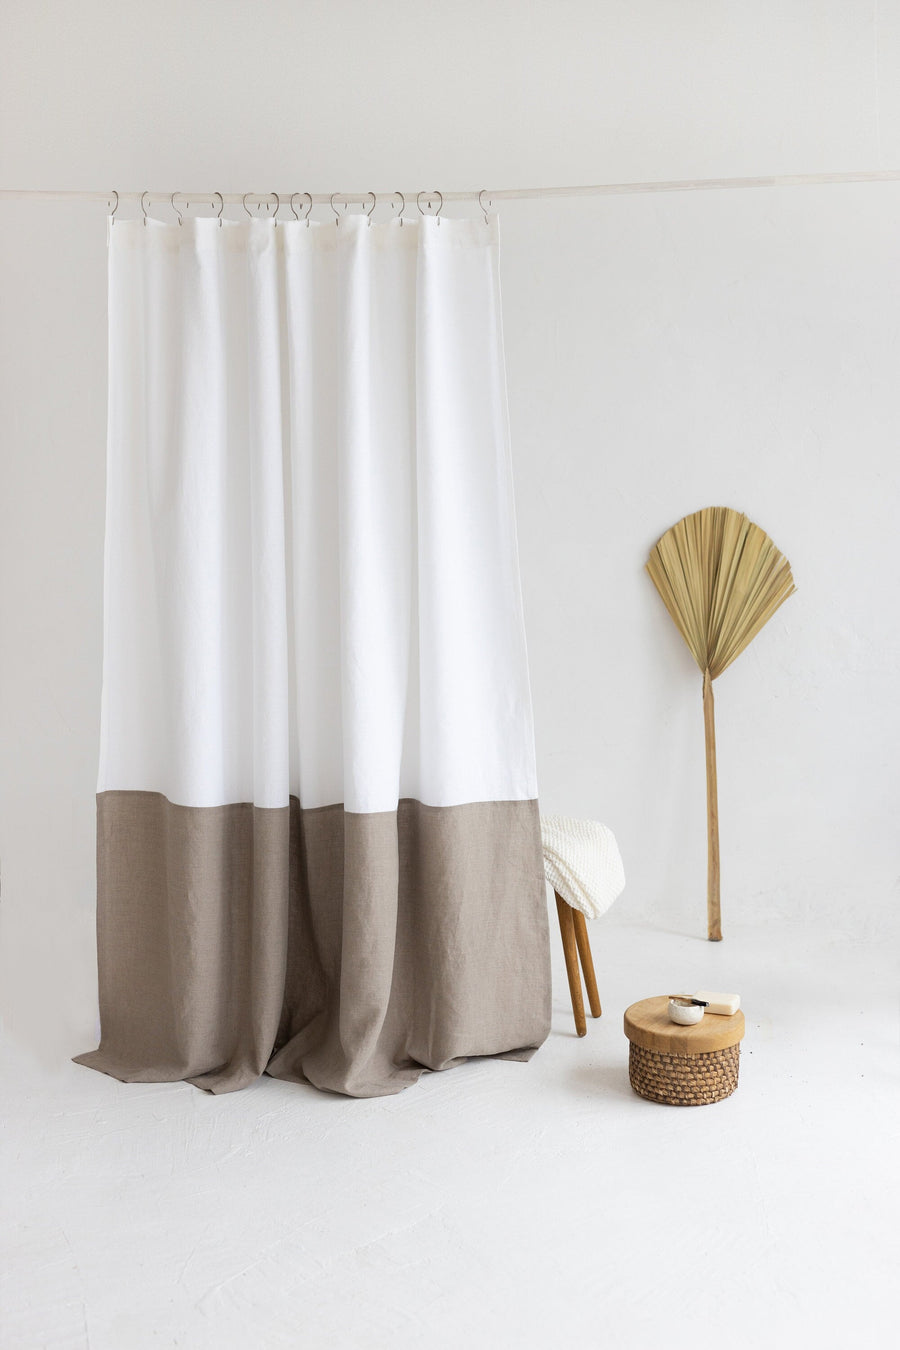 Waterproof White and Natural Linen Shower Curtain